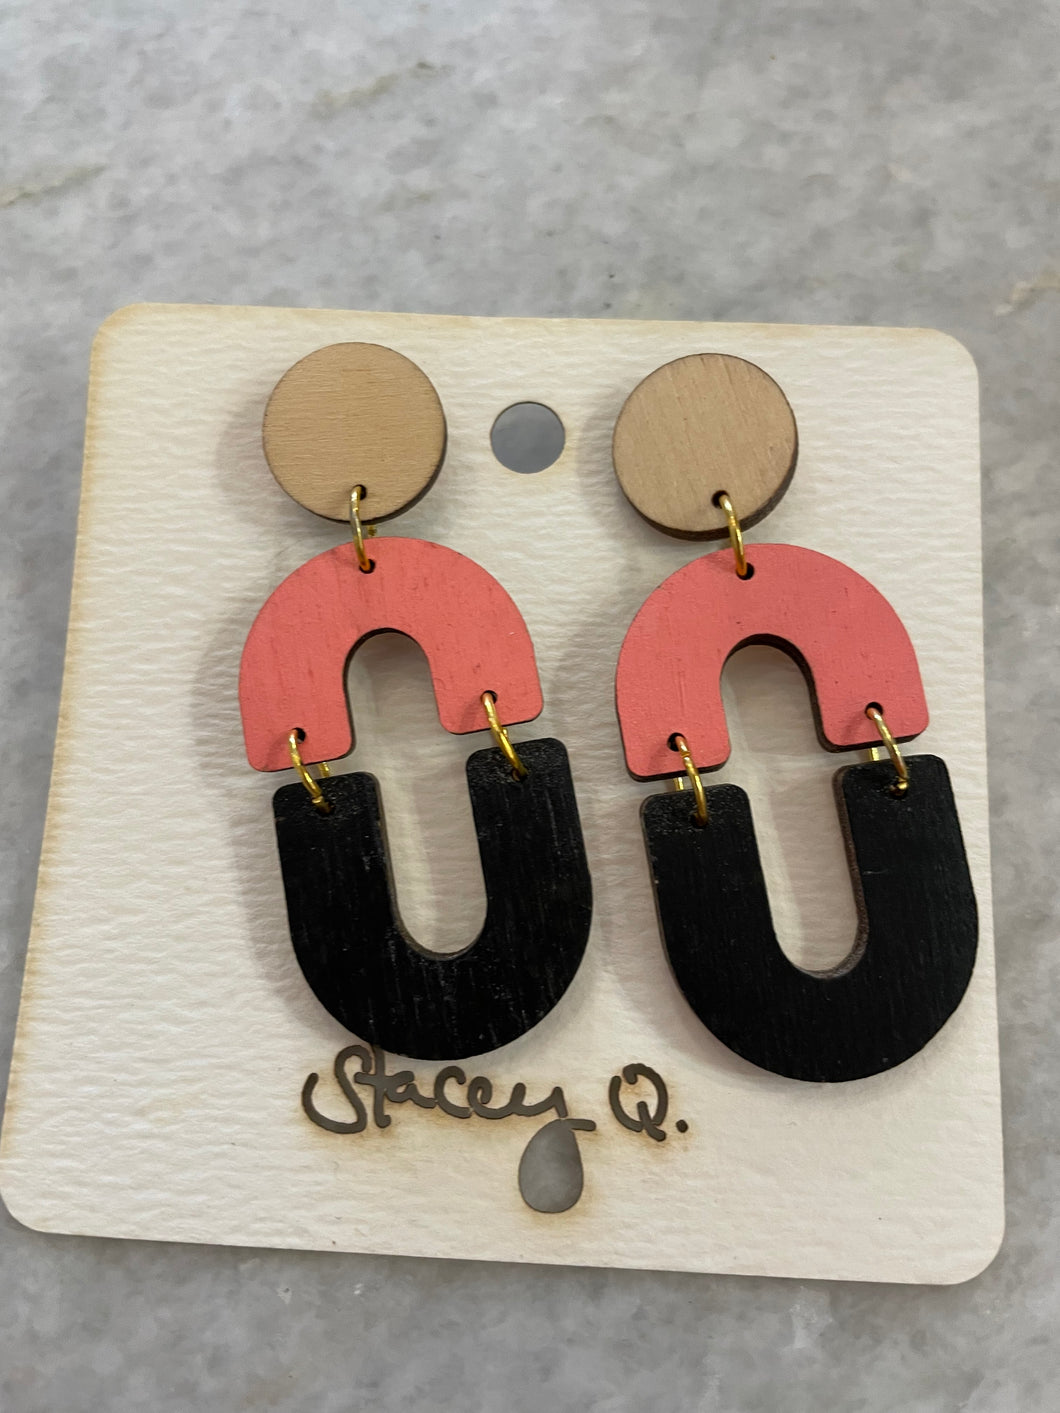 Pink & Black Double Arch Hand Painted Wood Earrings by Stacey Q.